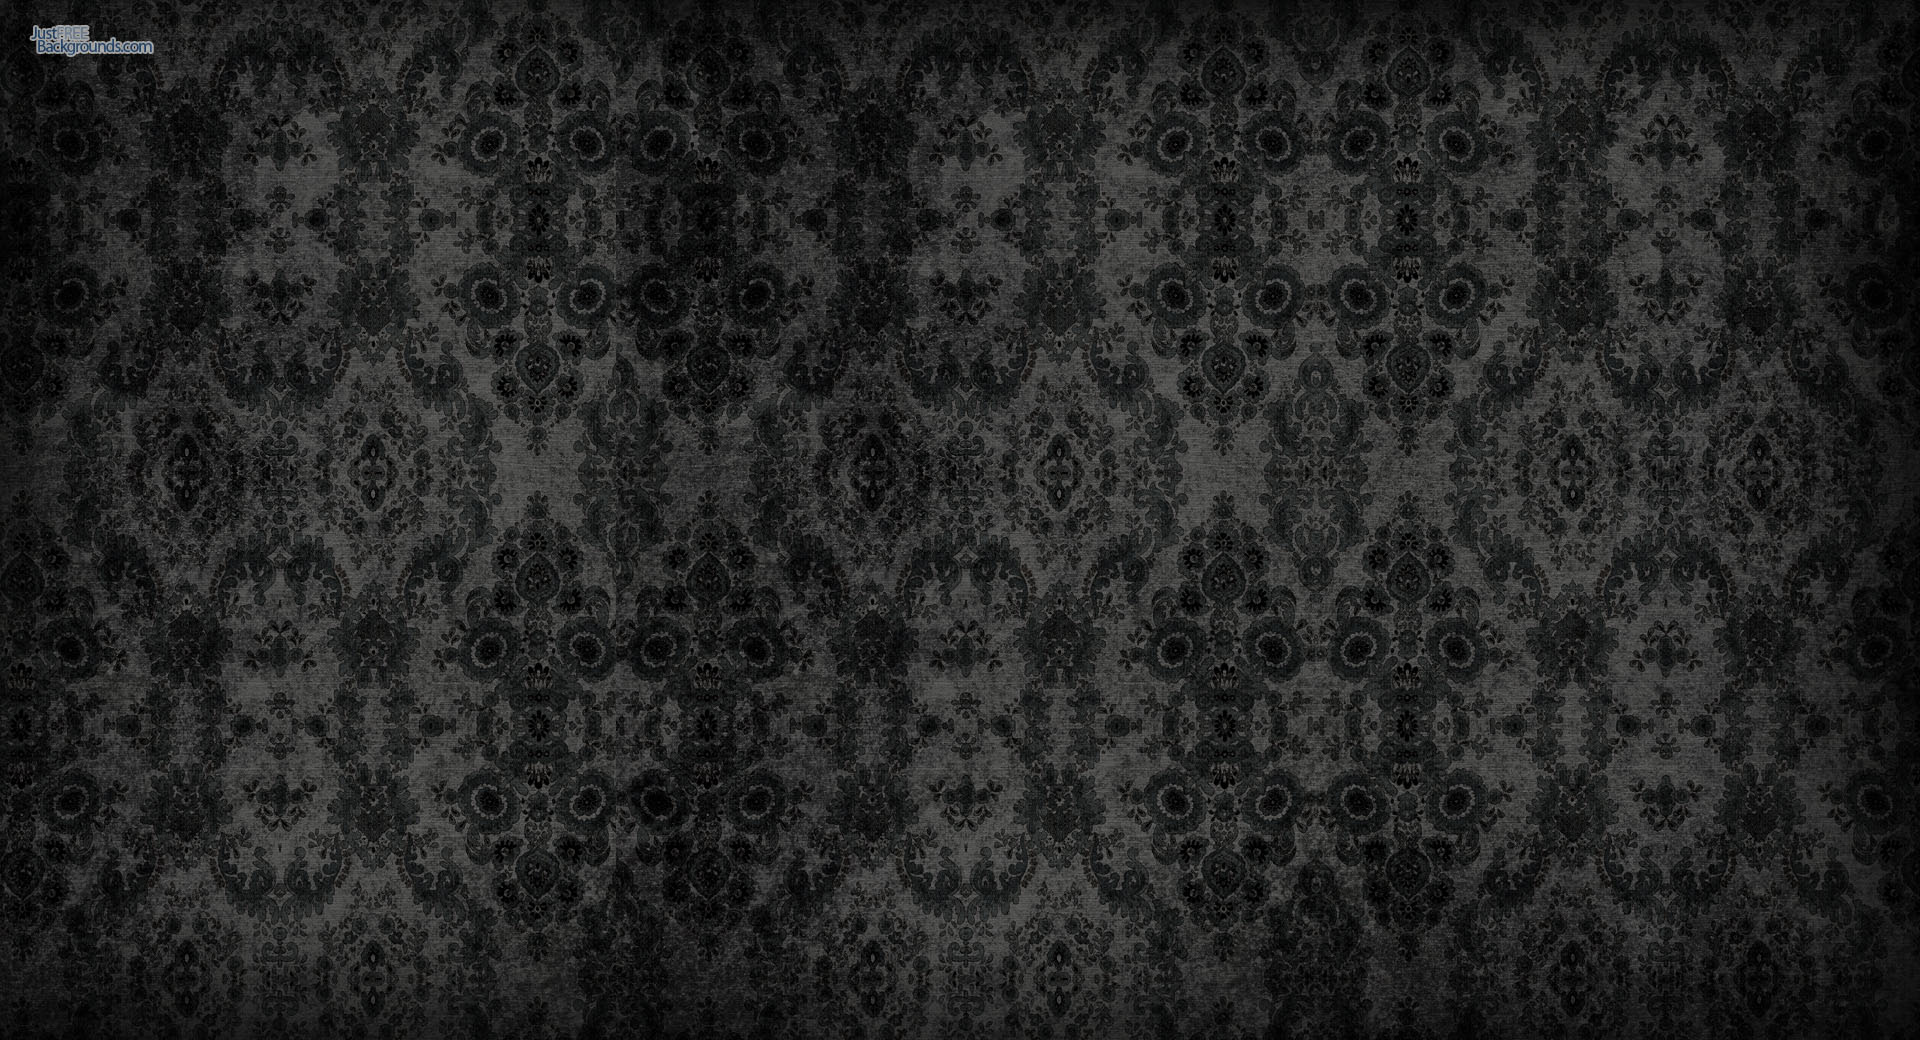 Black And White Vintage Wallpaper For Iphone #802 • Abstract at ...